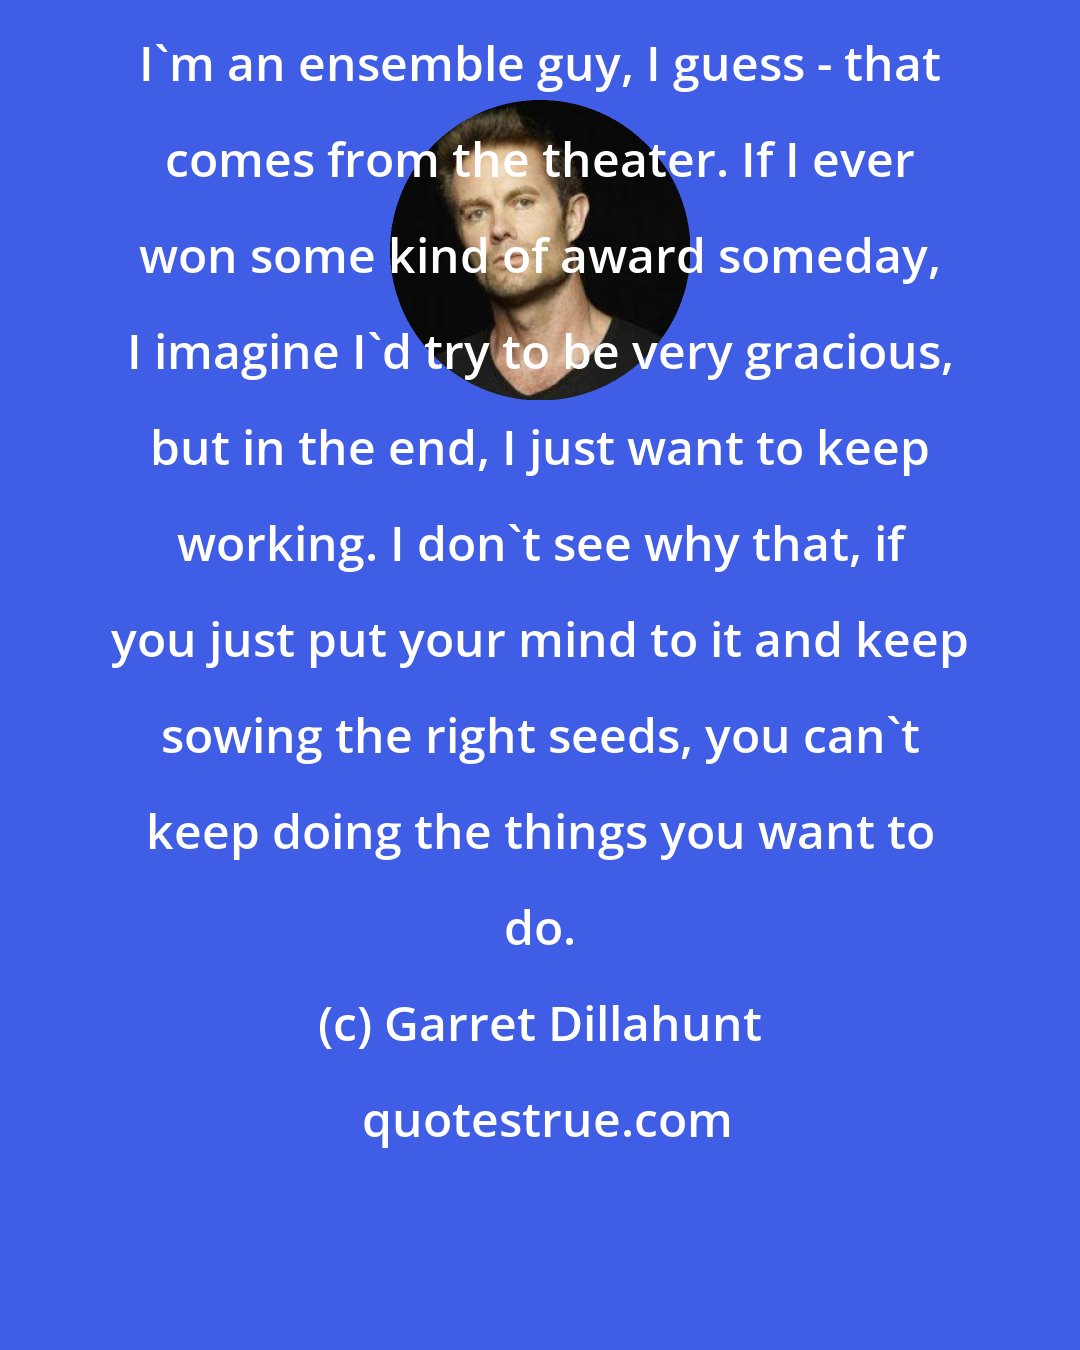 Garret Dillahunt: I'm an ensemble guy, I guess - that comes from the theater. If I ever won some kind of award someday, I imagine I'd try to be very gracious, but in the end, I just want to keep working. I don't see why that, if you just put your mind to it and keep sowing the right seeds, you can't keep doing the things you want to do.